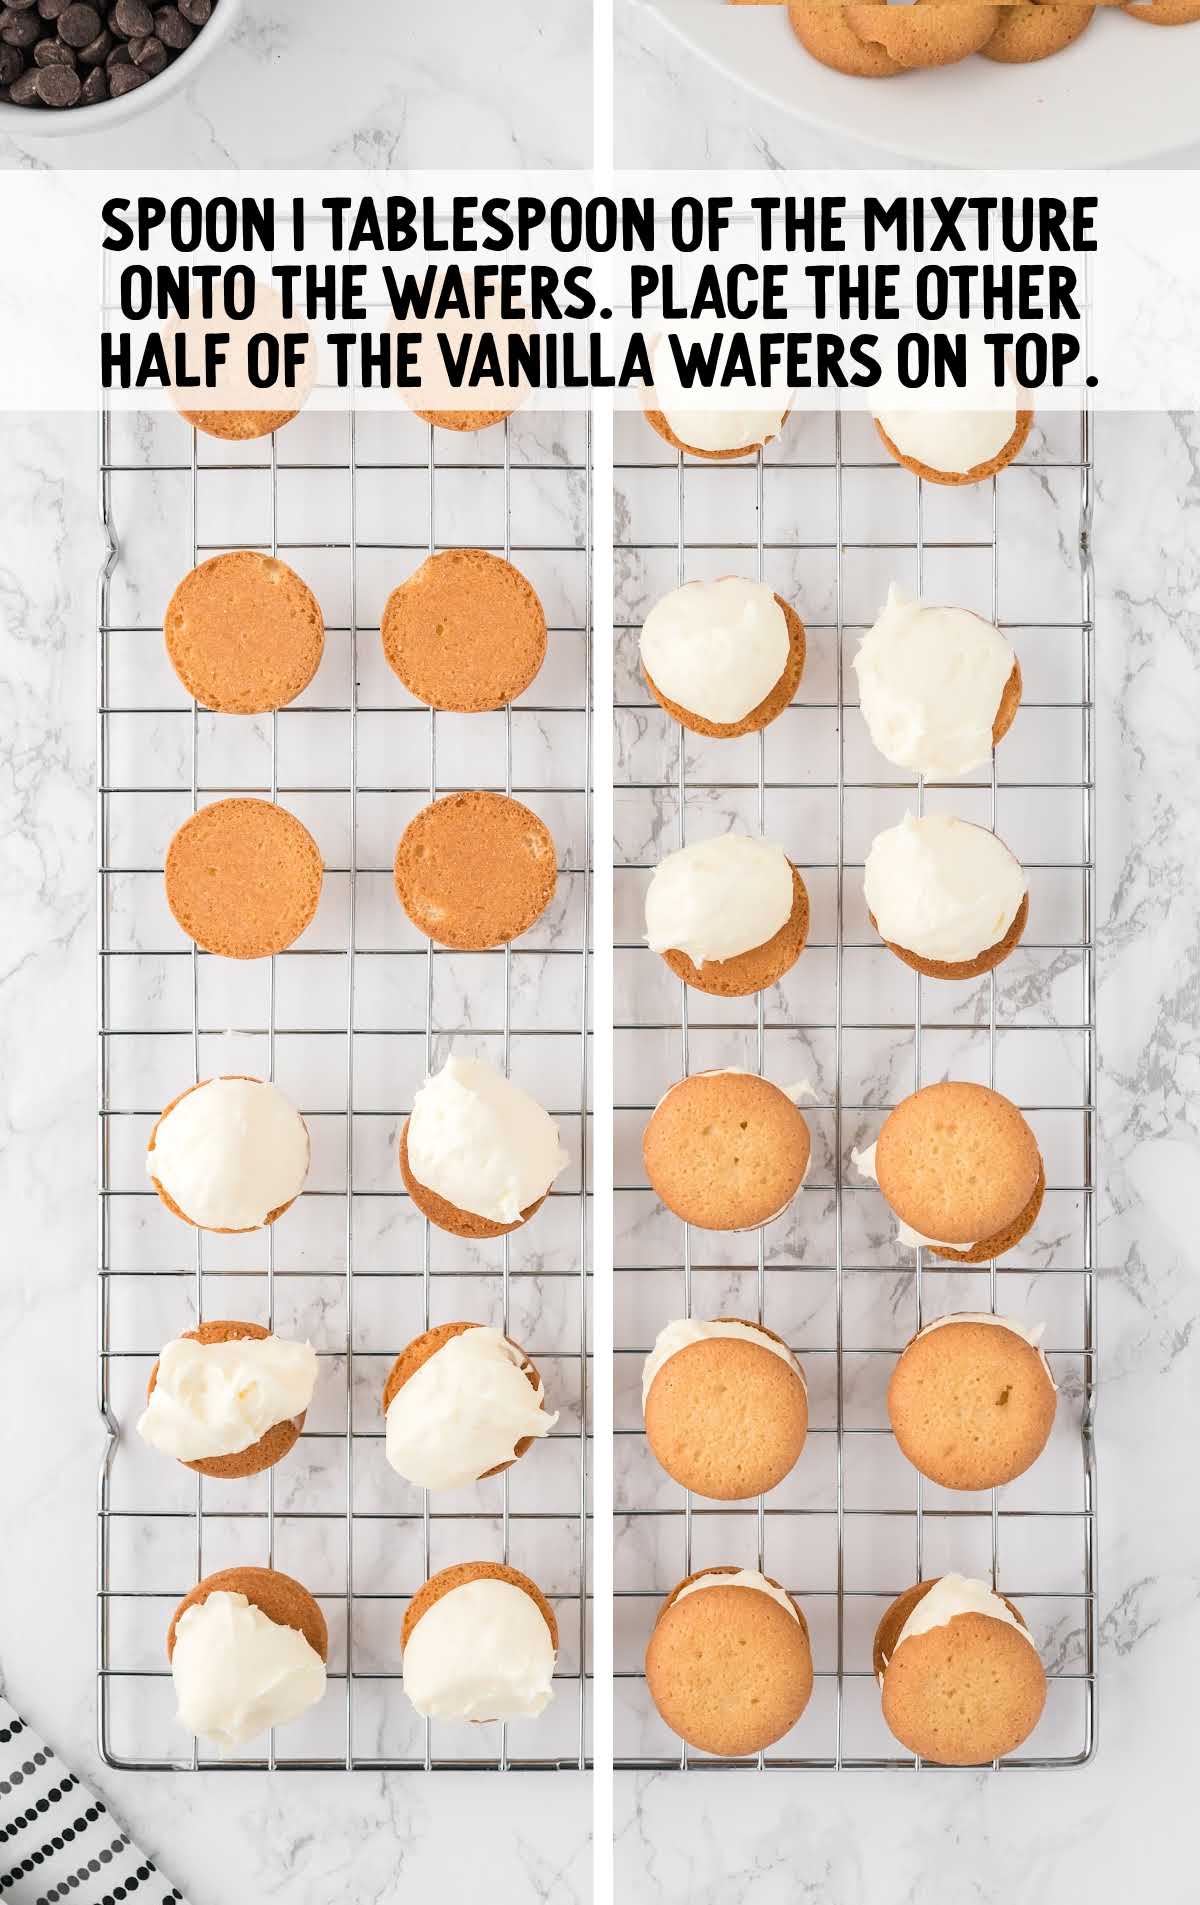 mixture spooned onto the wafers and then placed the other half of the vanilla wafers on top